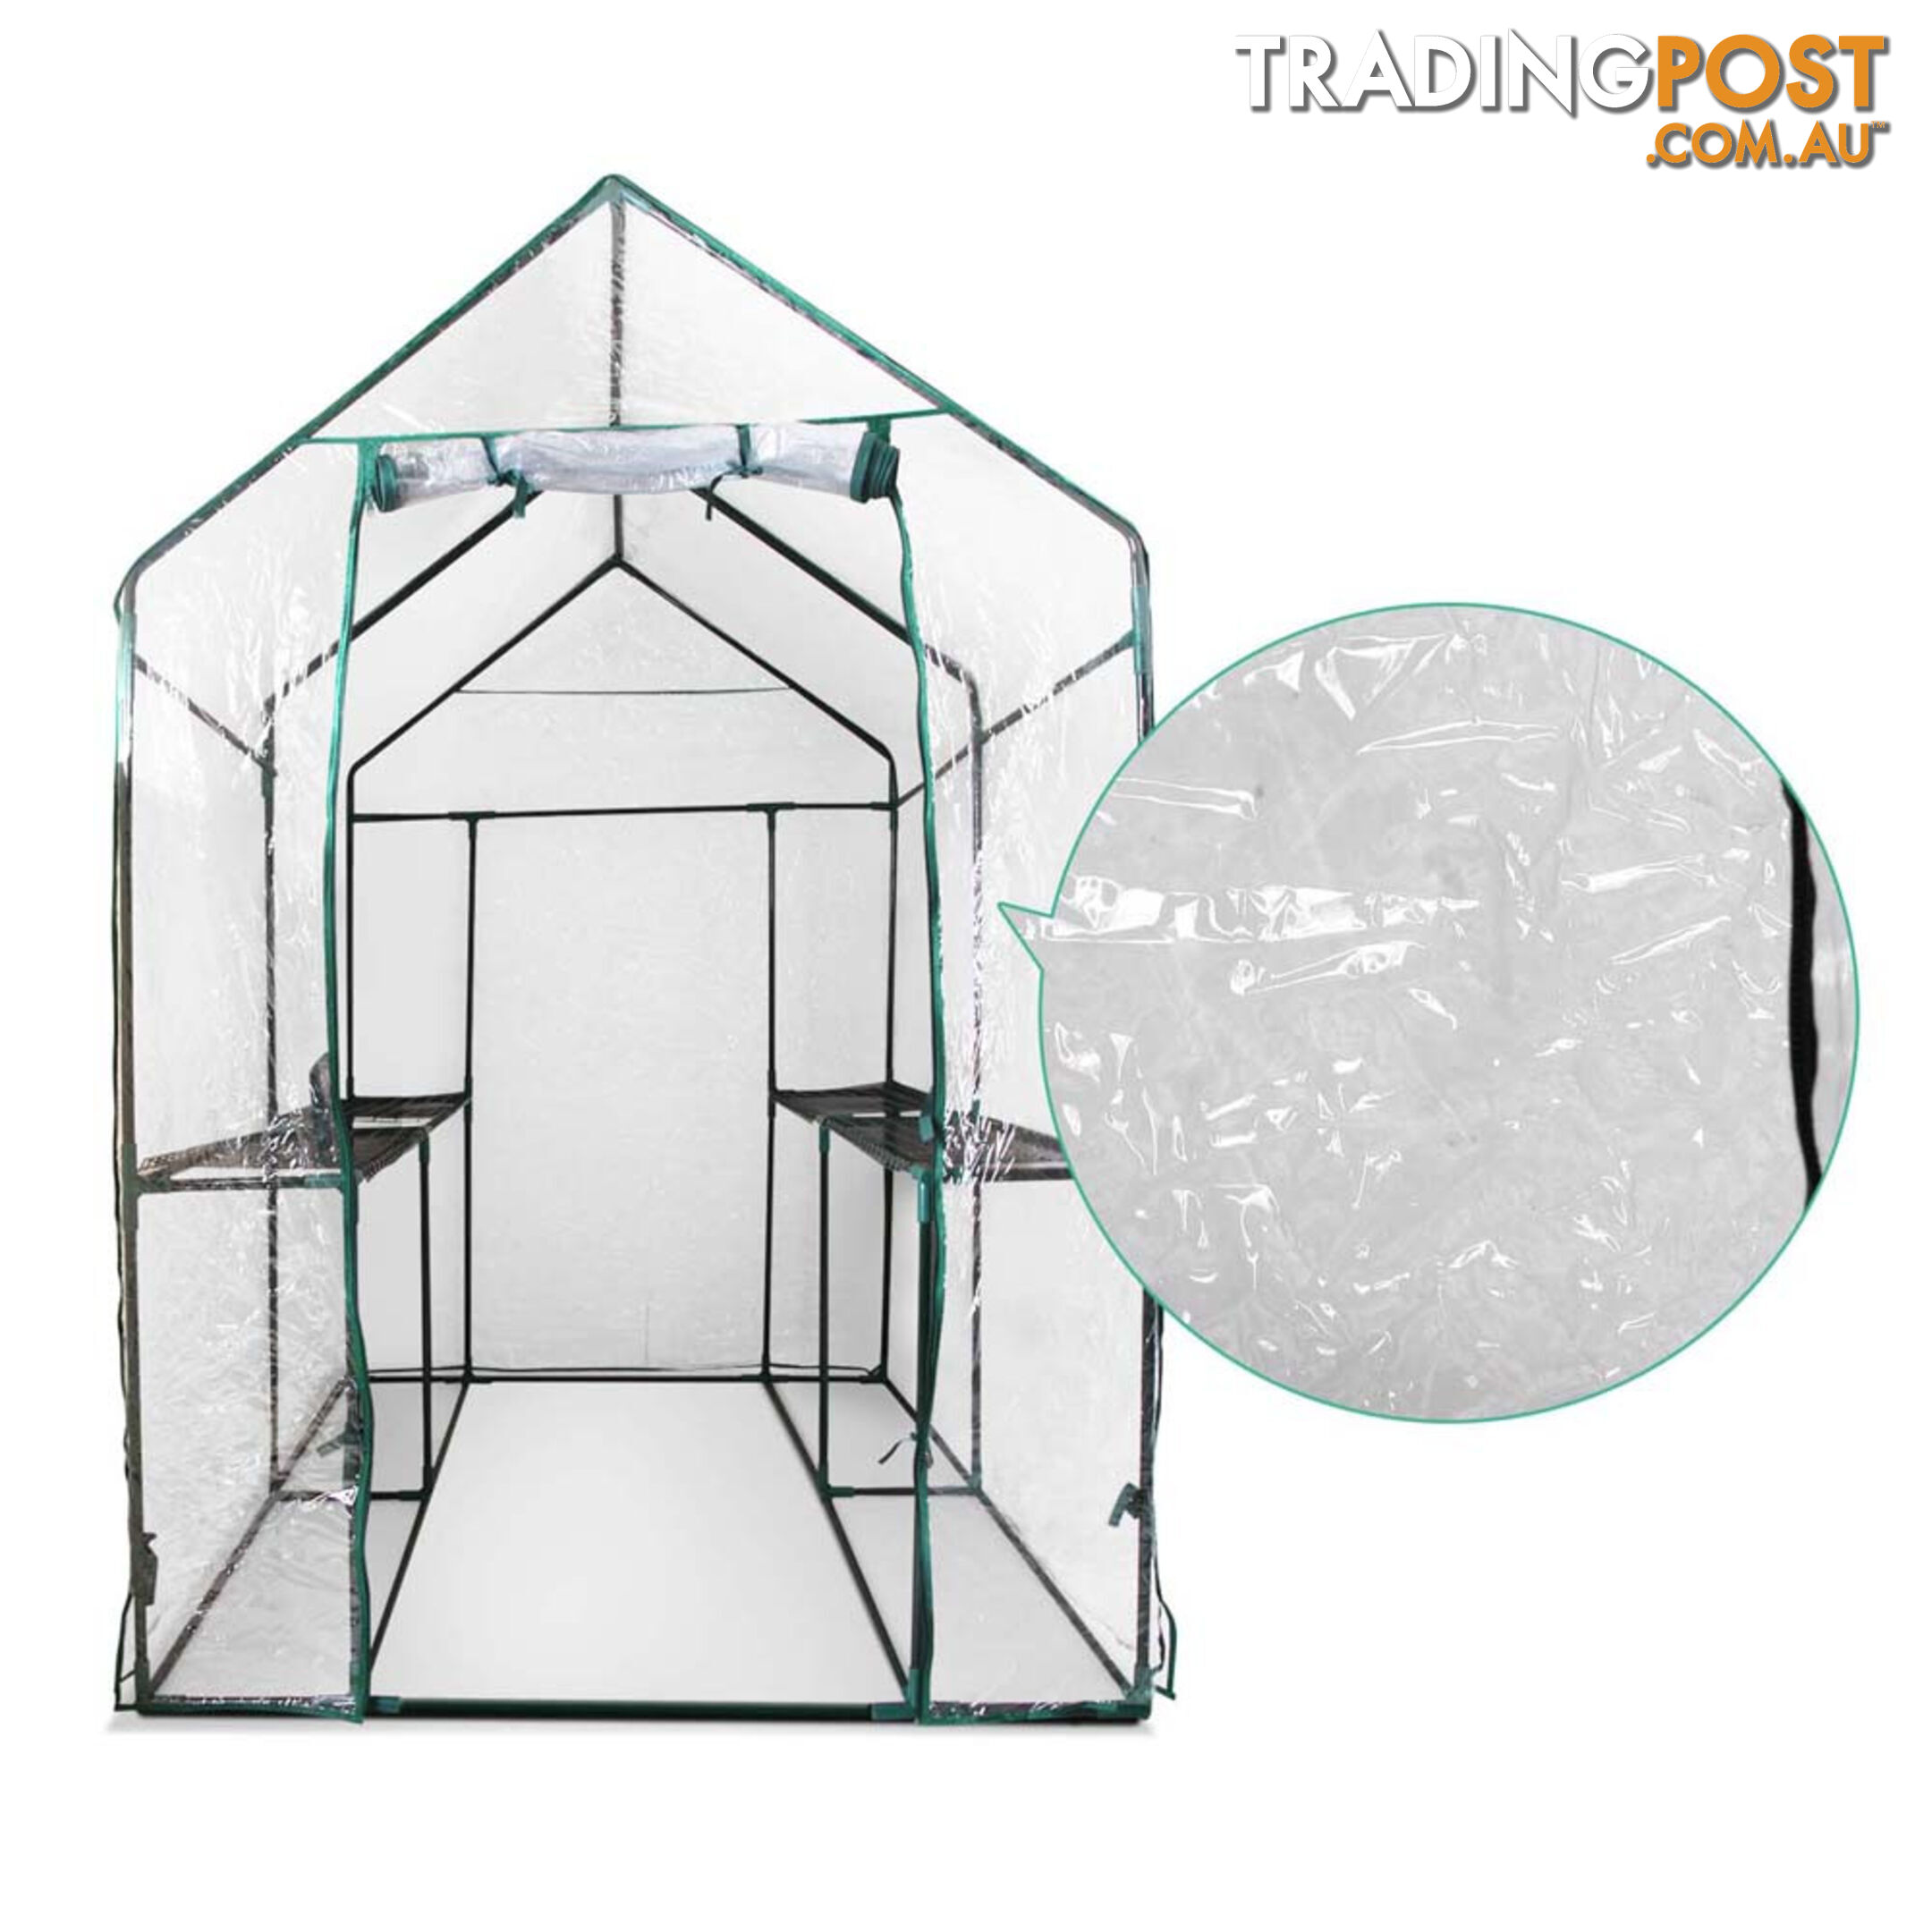 Greenhouse with Transparent PVC Cover - 1.9M x 1.2M